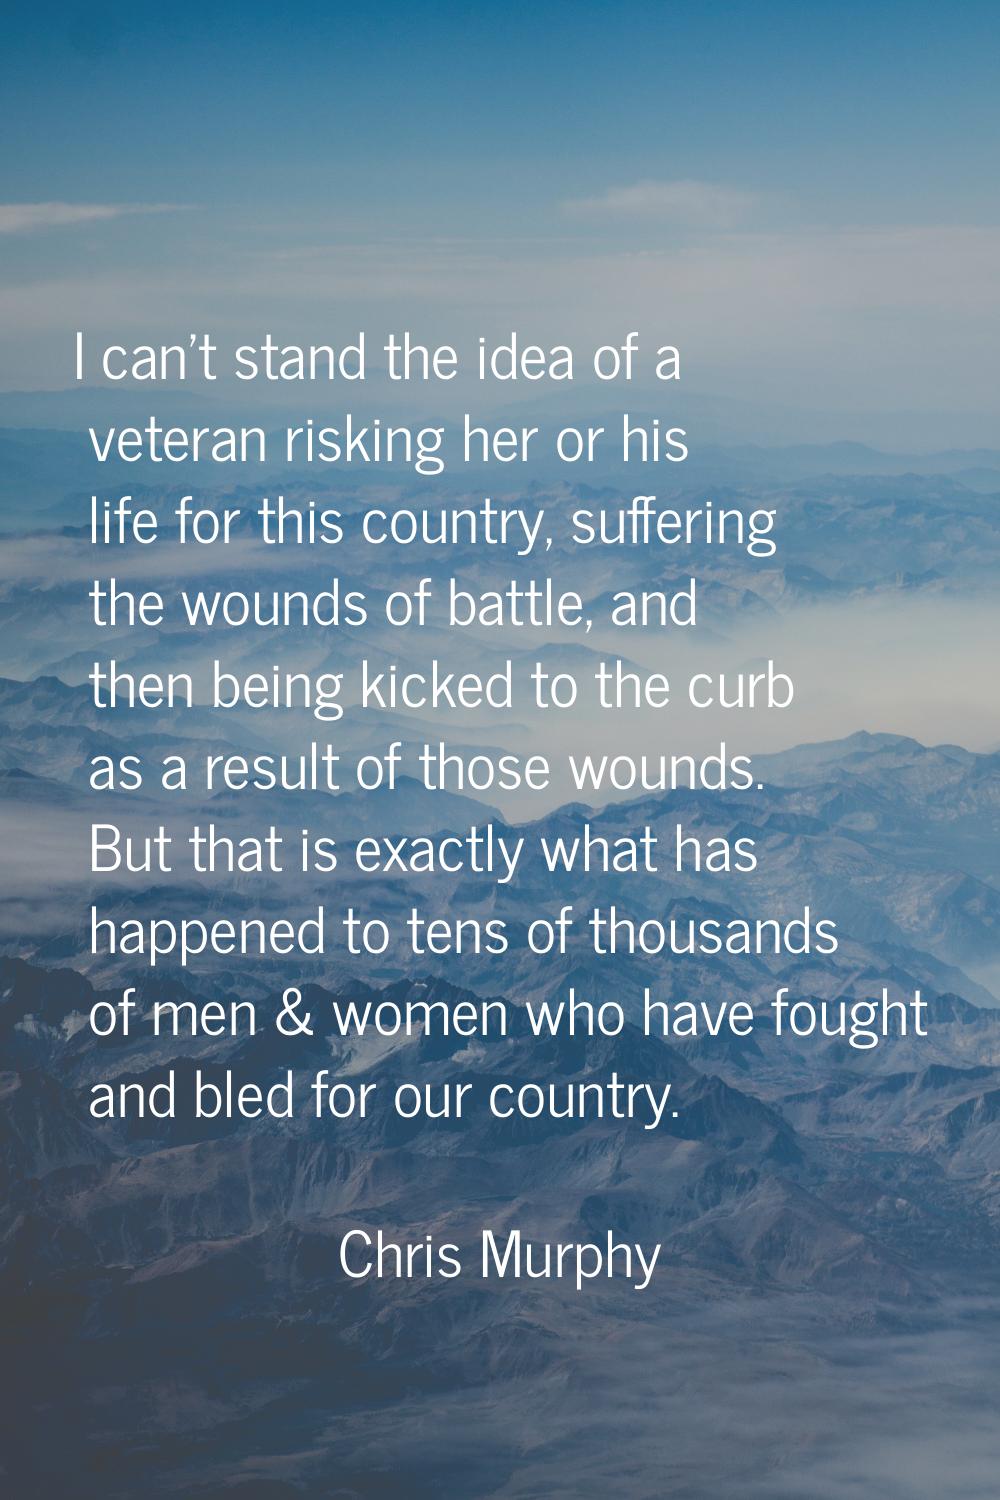 I can't stand the idea of a veteran risking her or his life for this country, suffering the wounds 